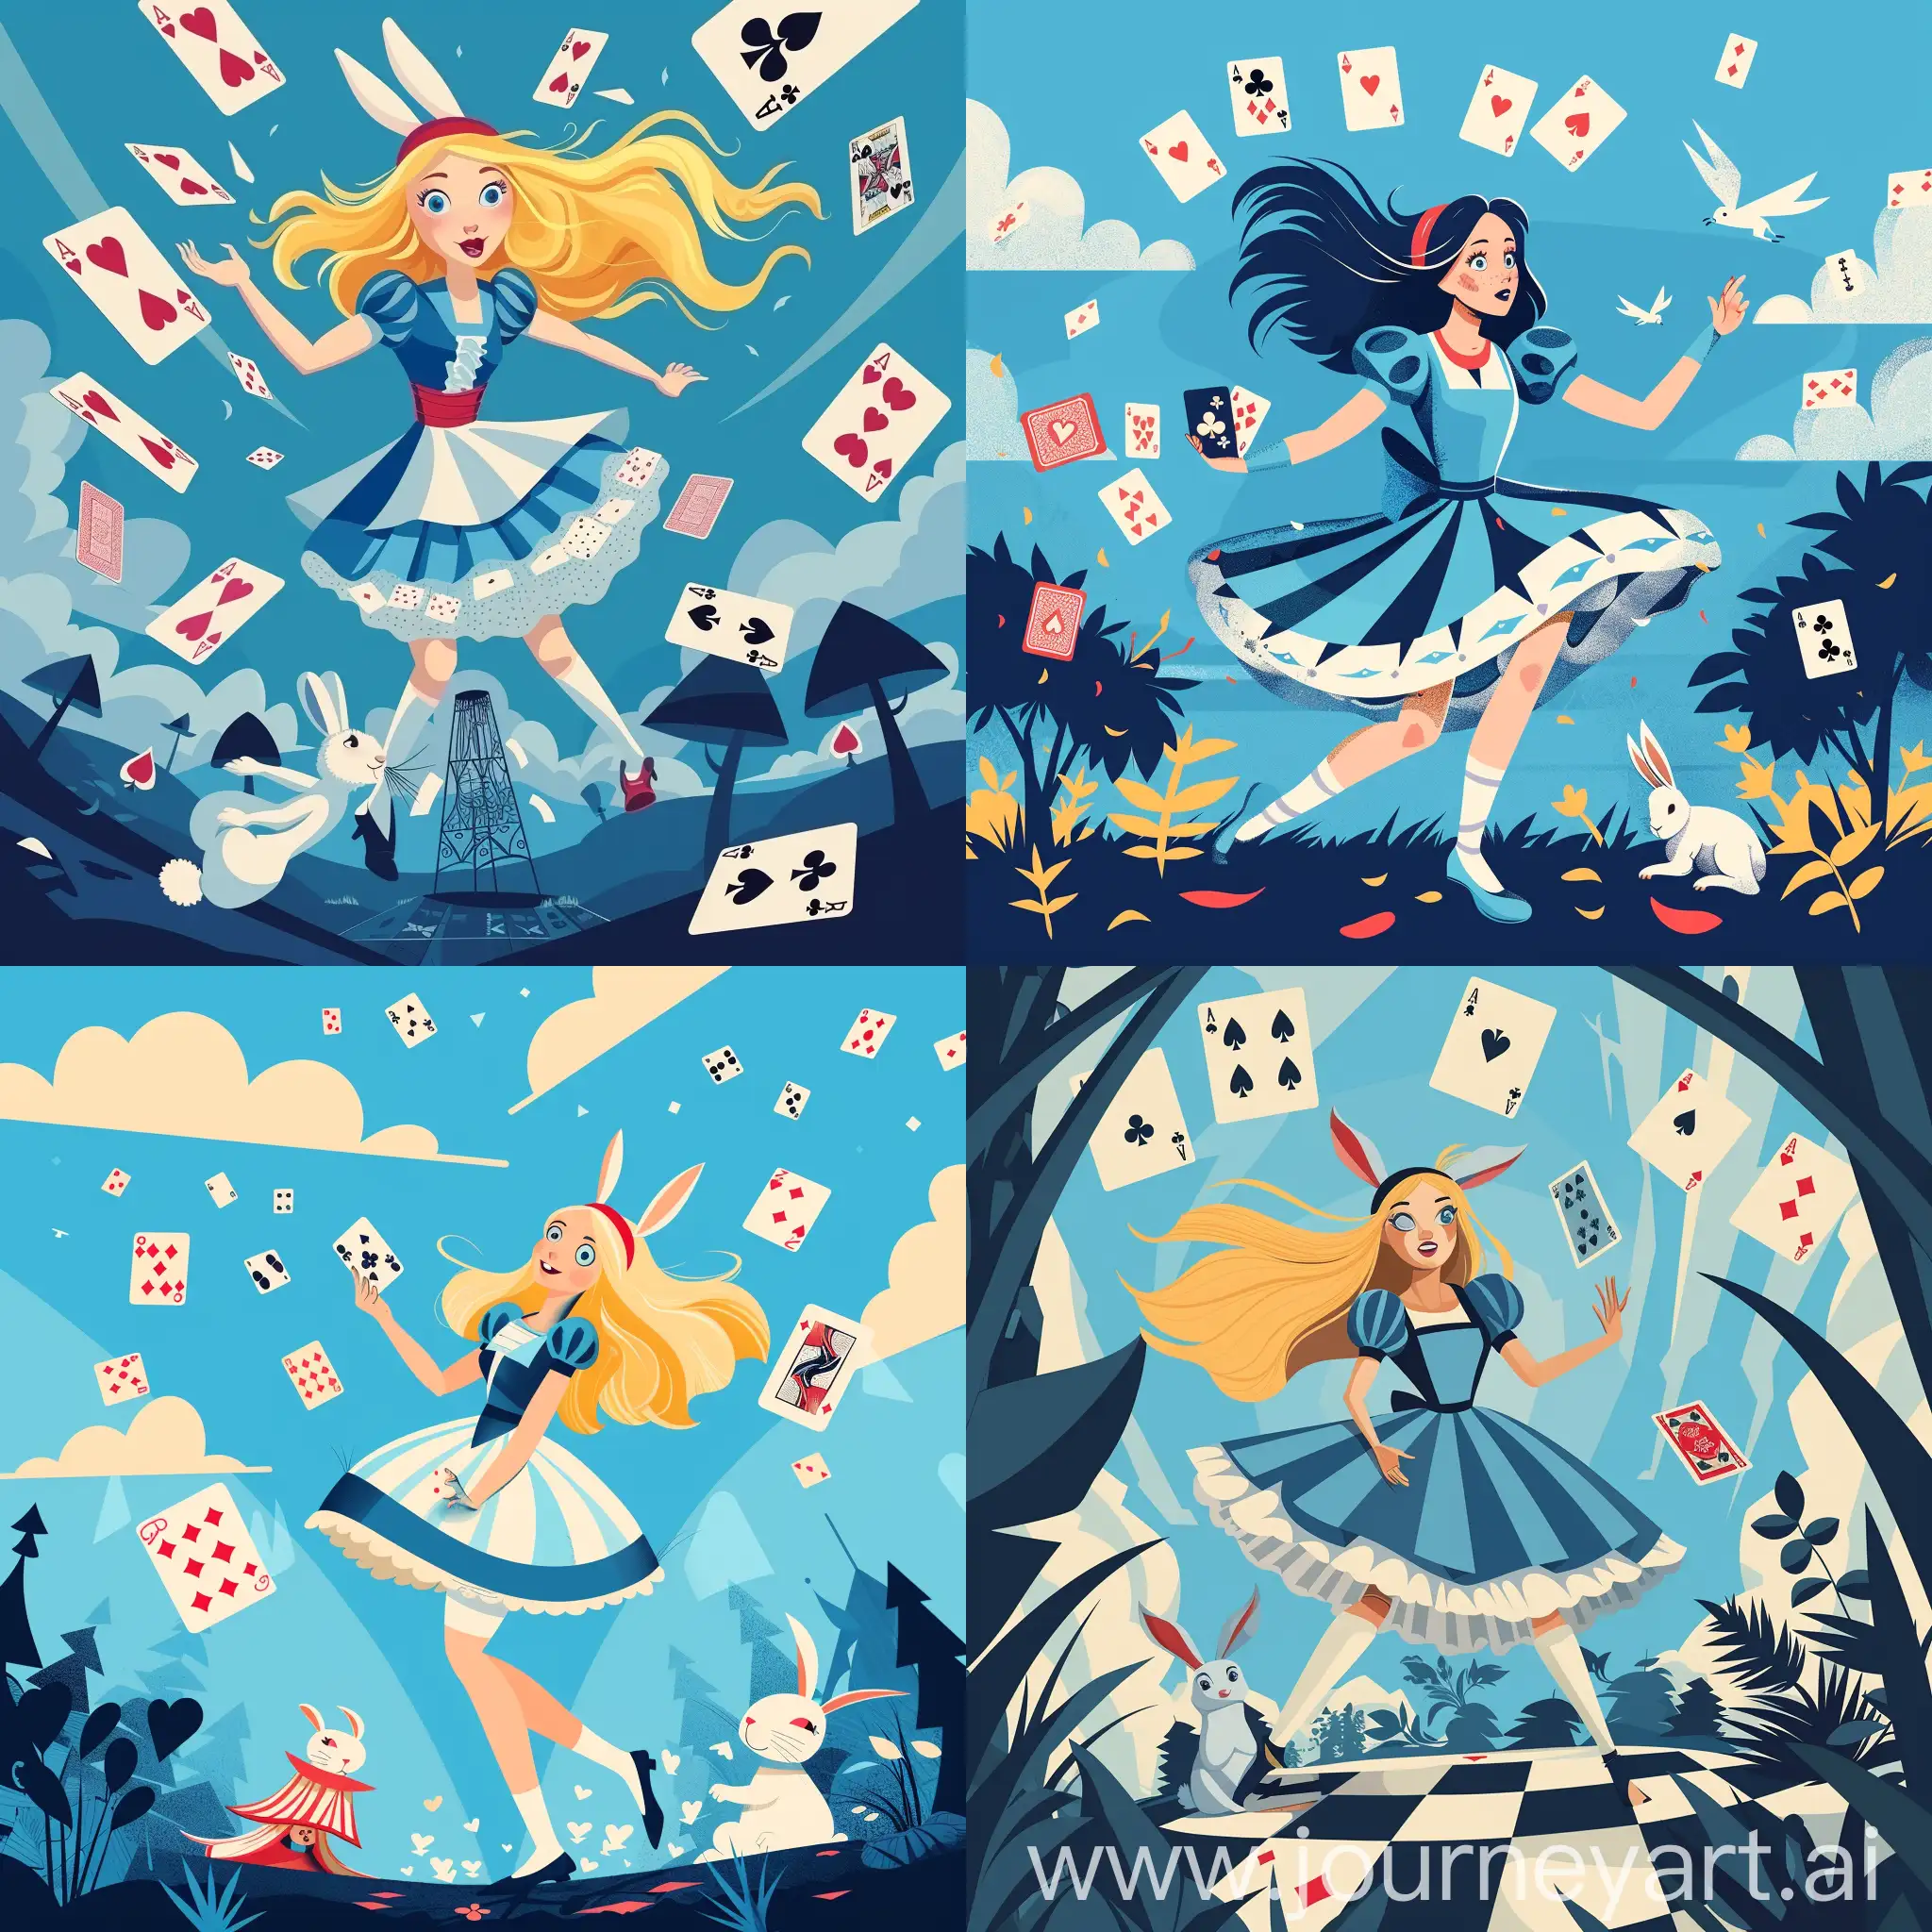 Dynamic-Illustration-of-Alice-with-Rabbit-and-Playing-Cards-under-Blue-Sky